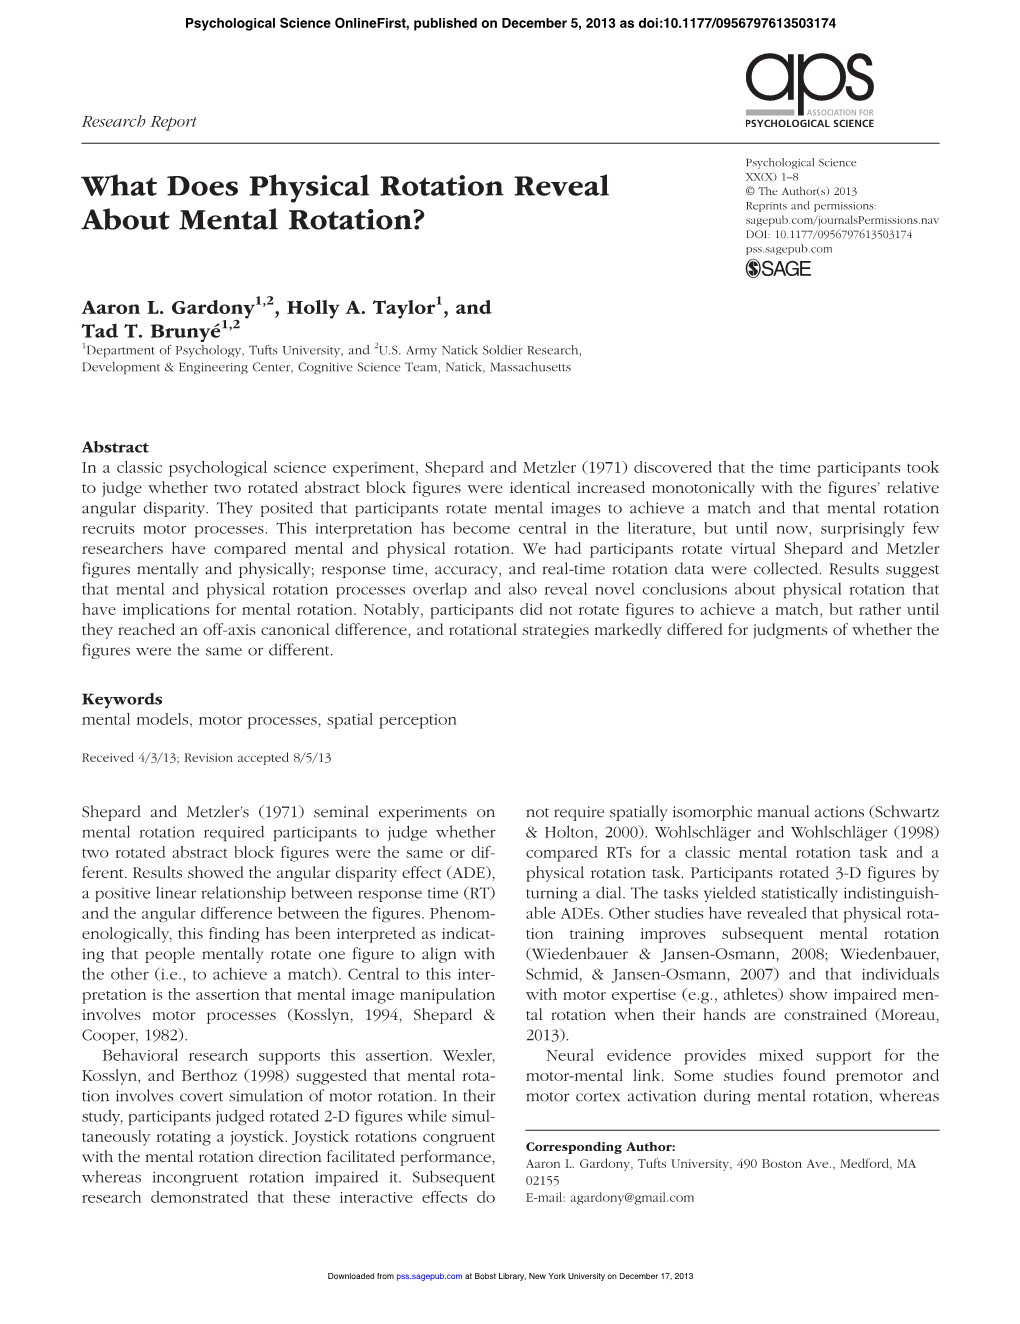 What Does Physical Rotation Reveal About Mental Rotation?